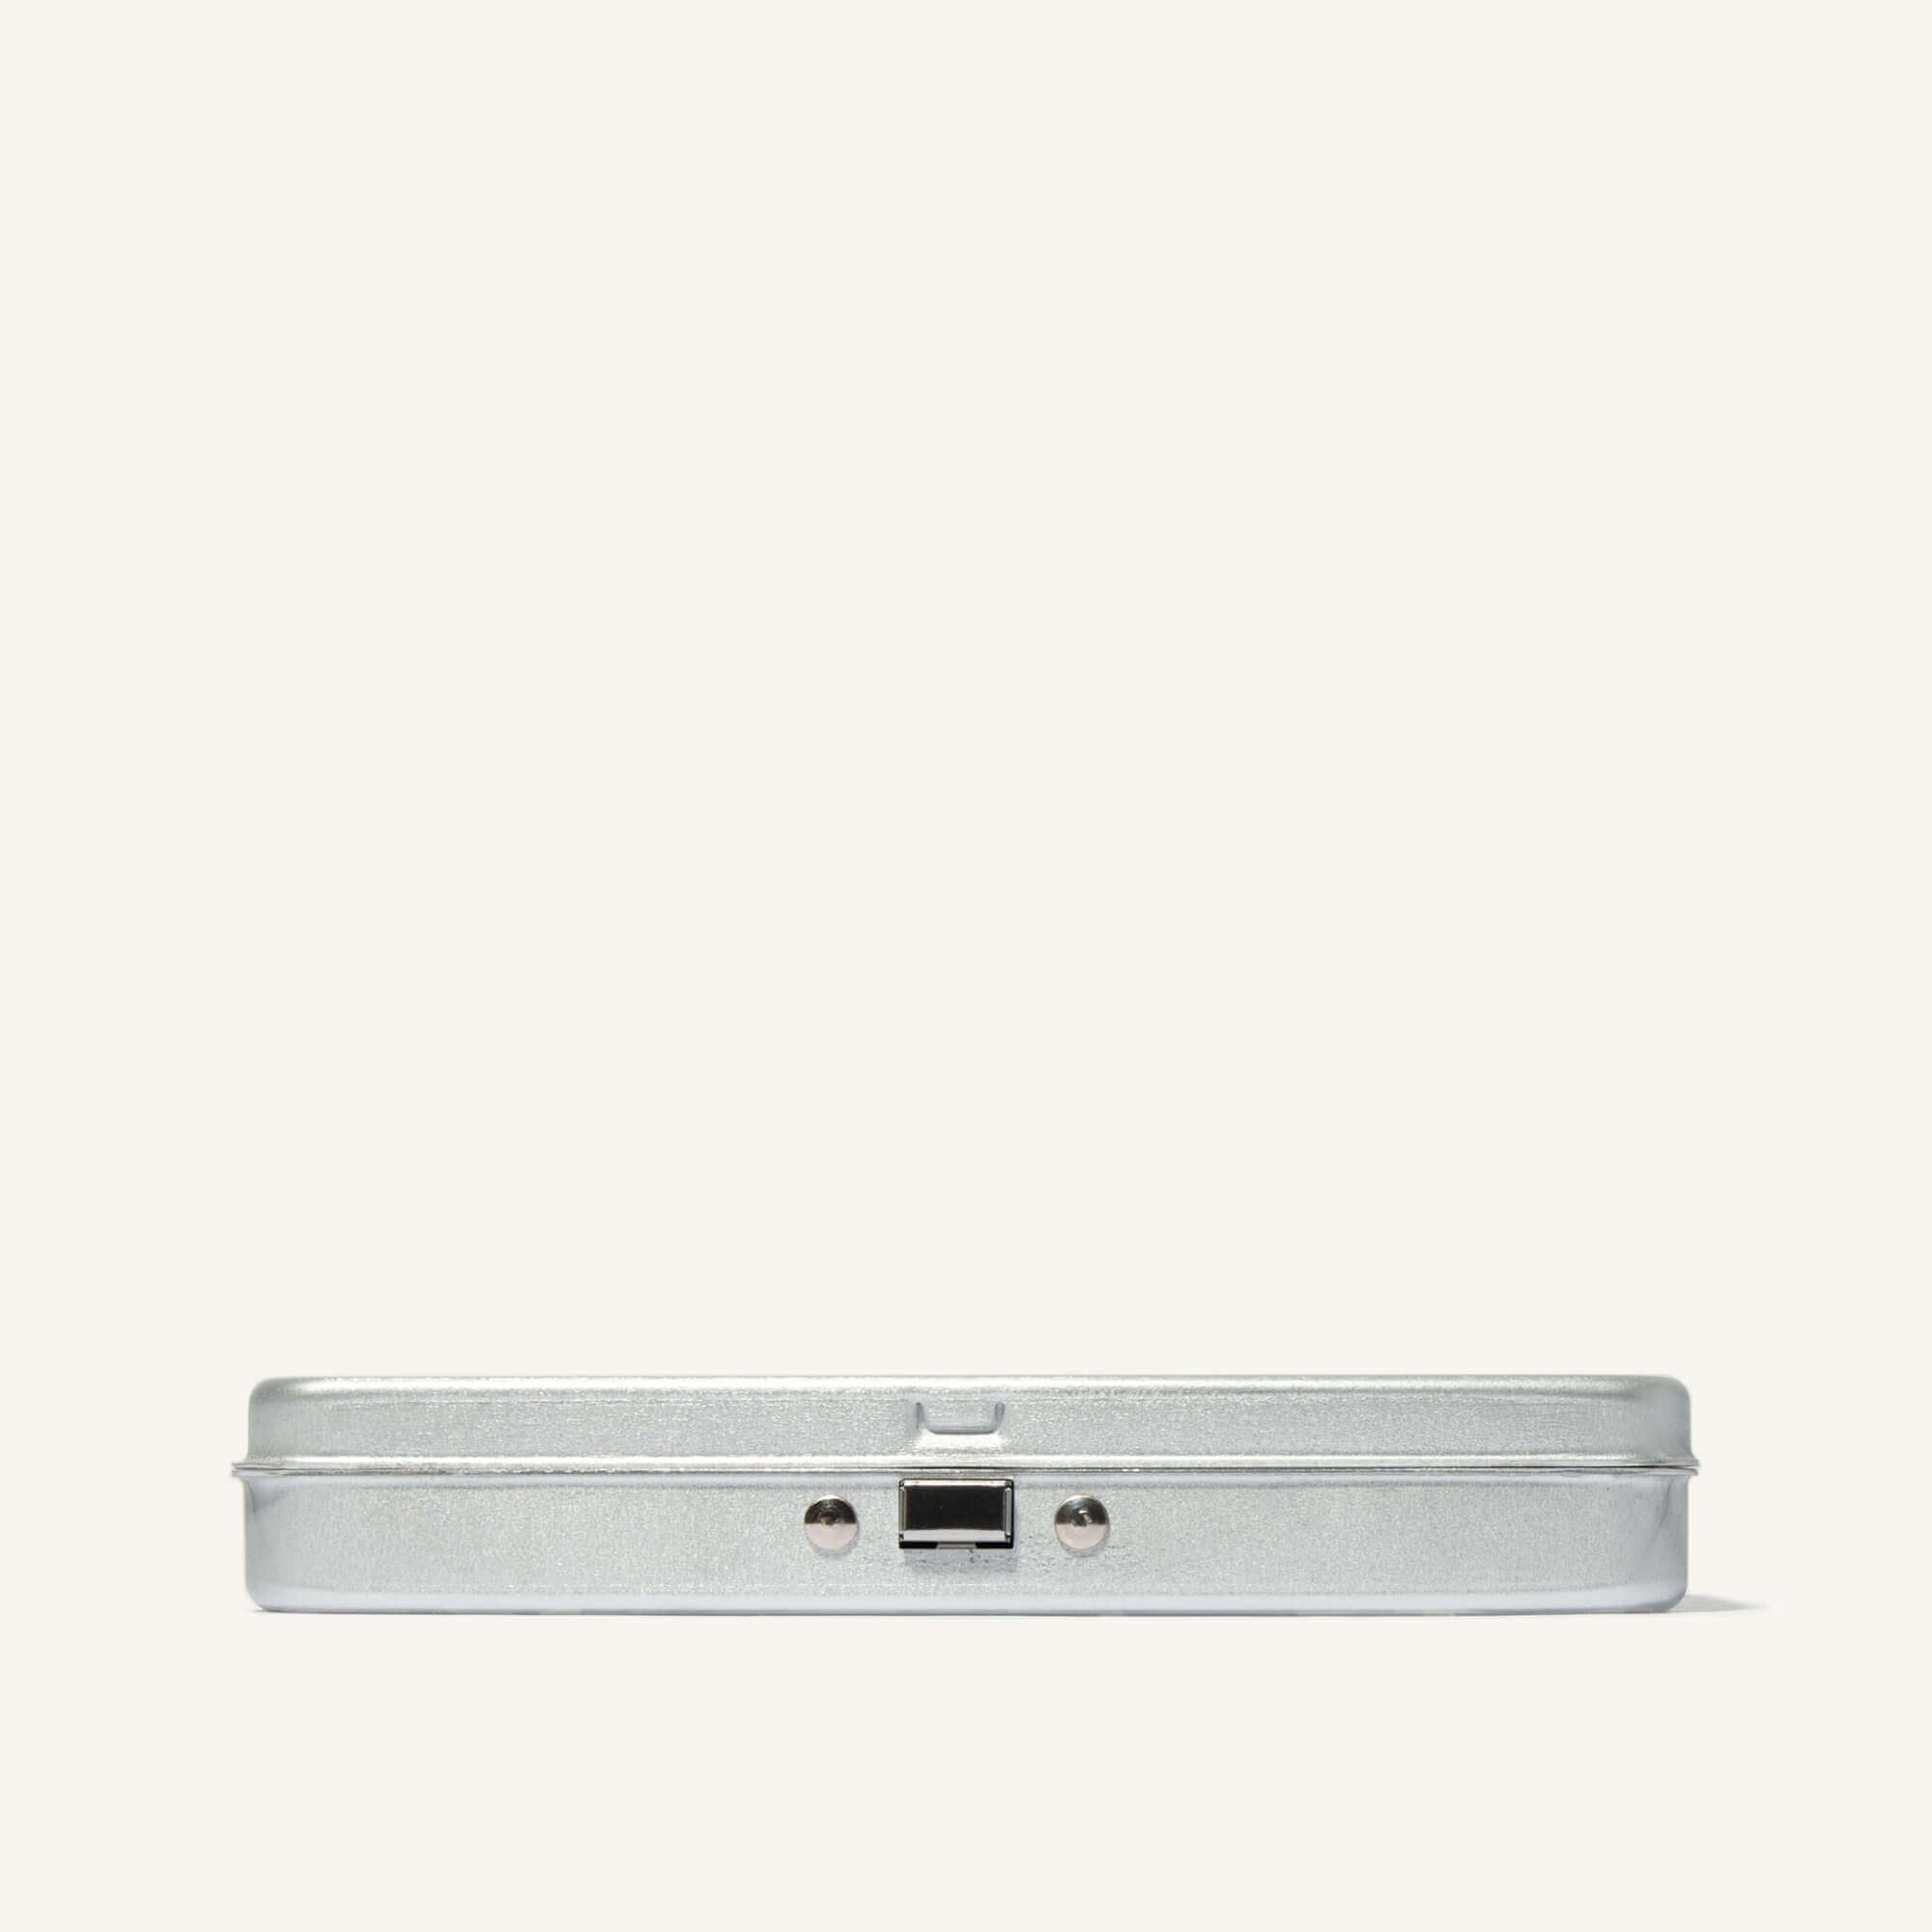 Silver case on white background, front face.